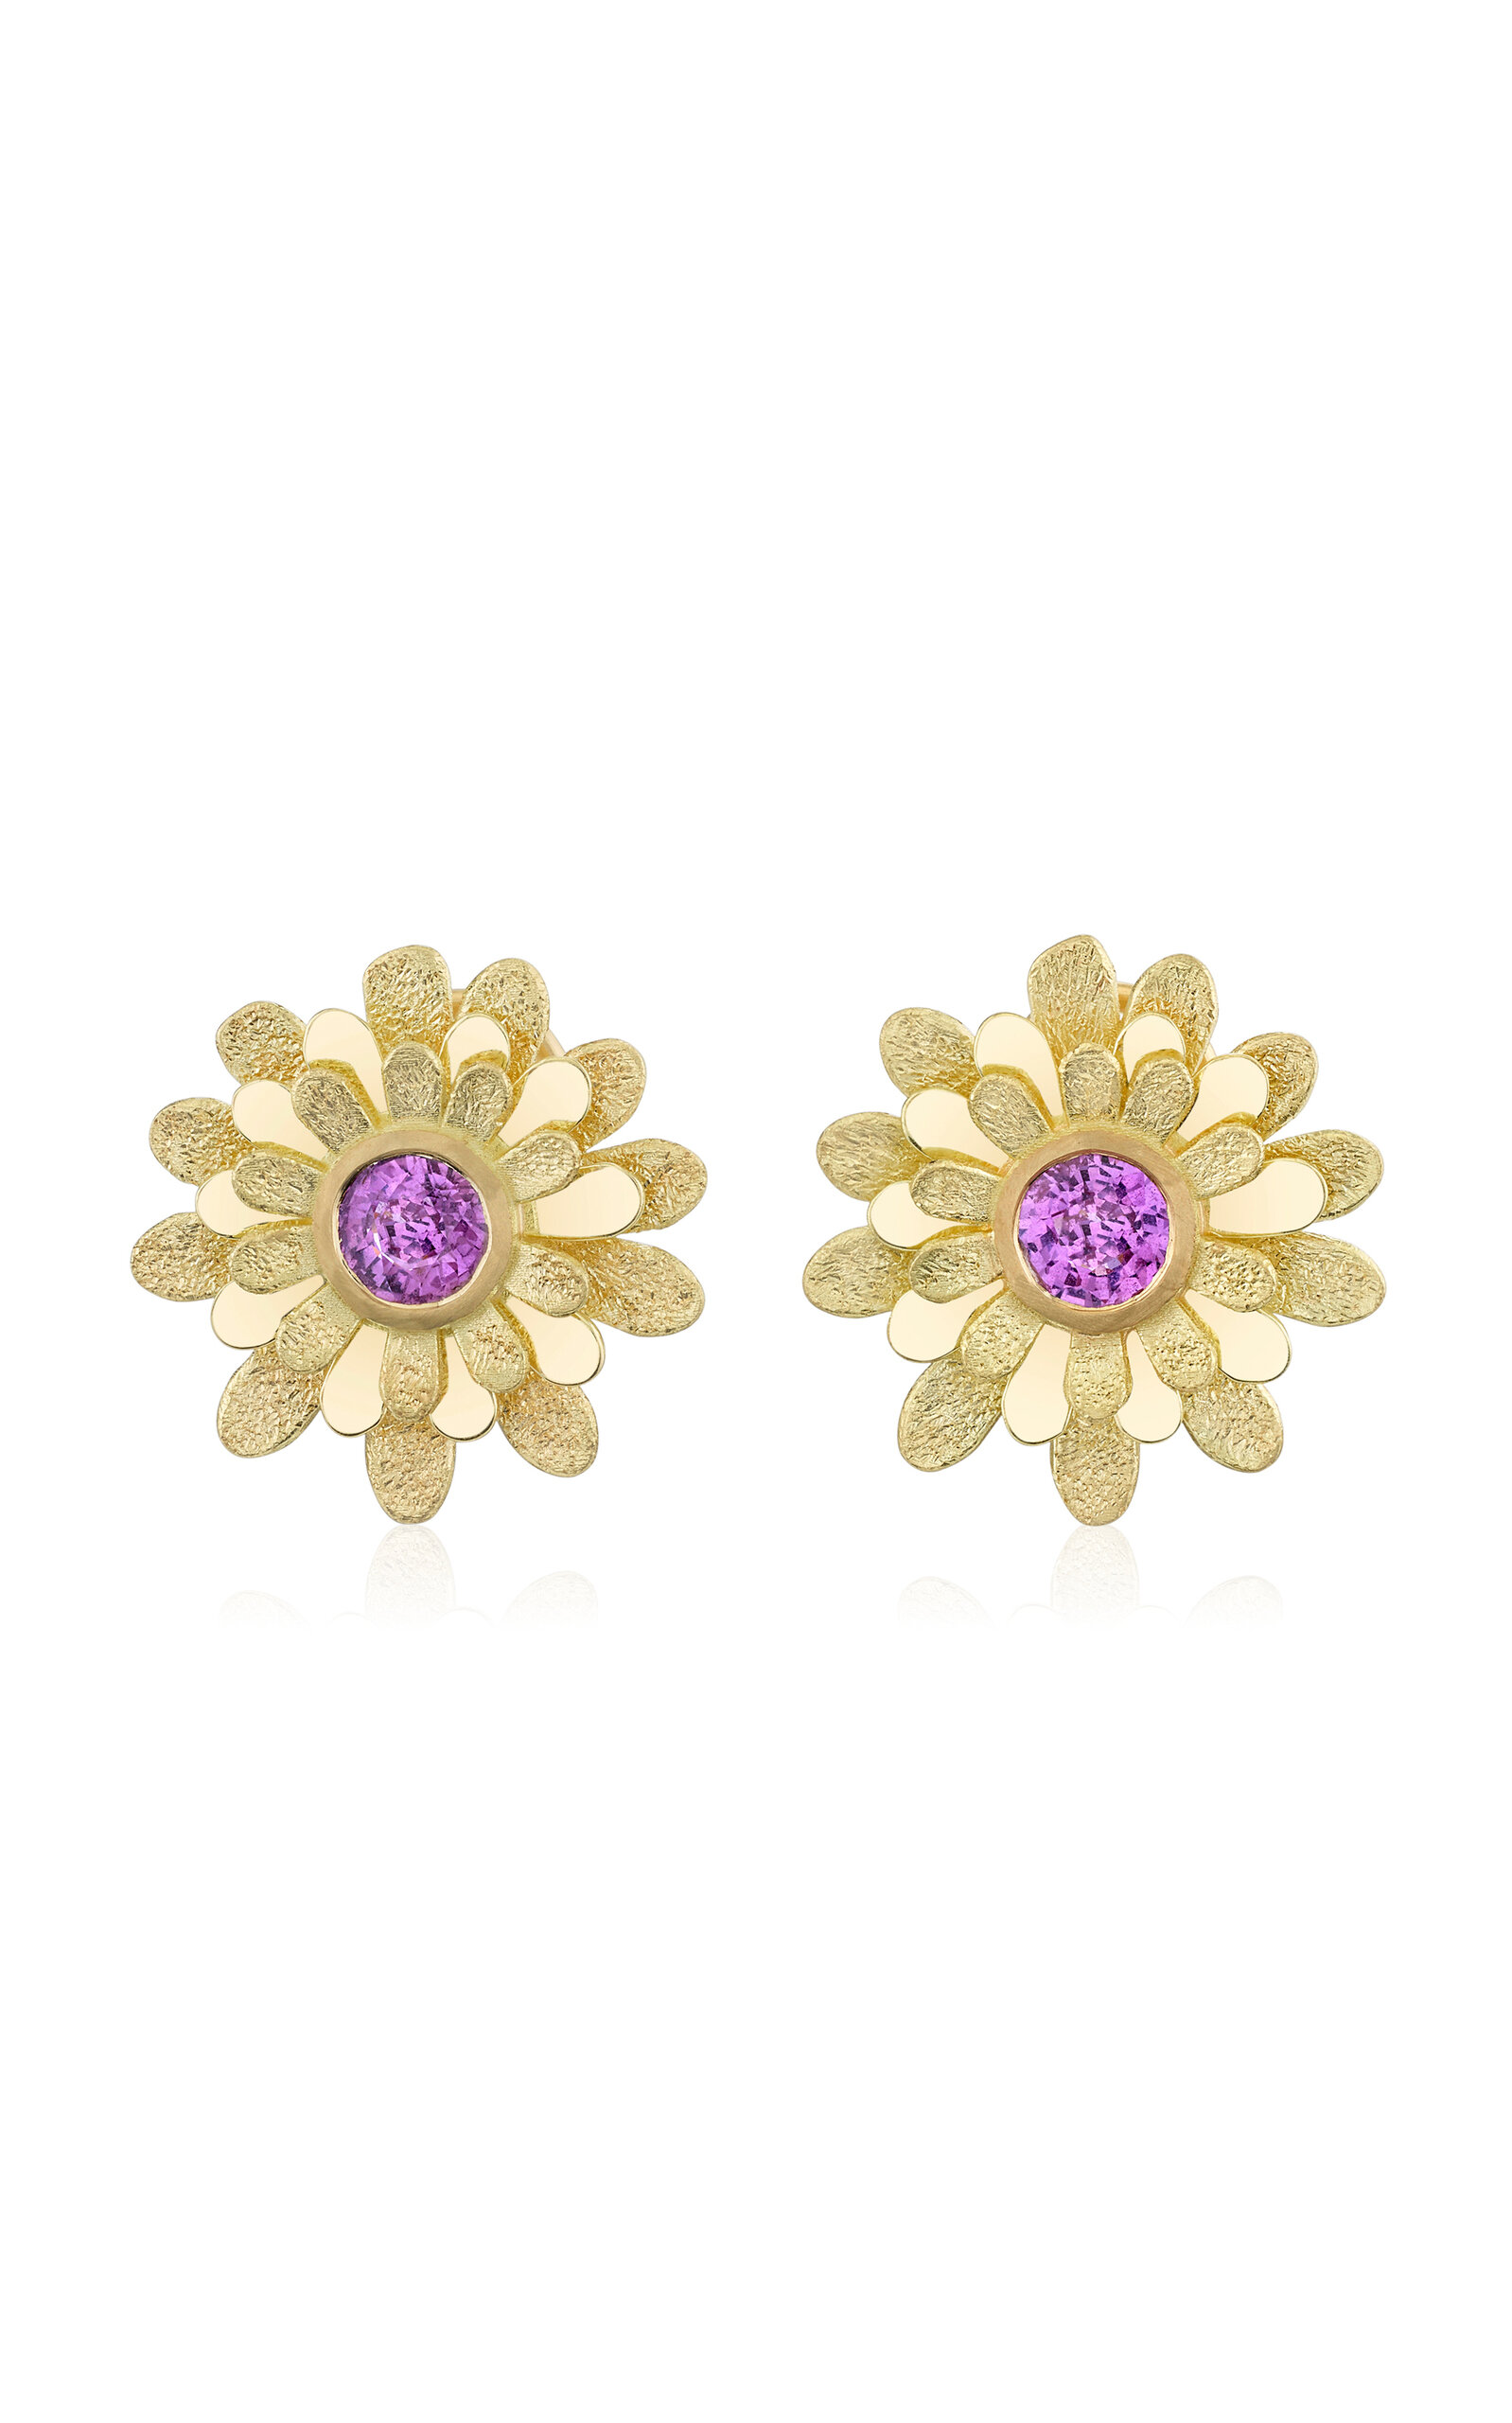 18k Yellow Gold Dahlia Earrings with Pink Sapphires